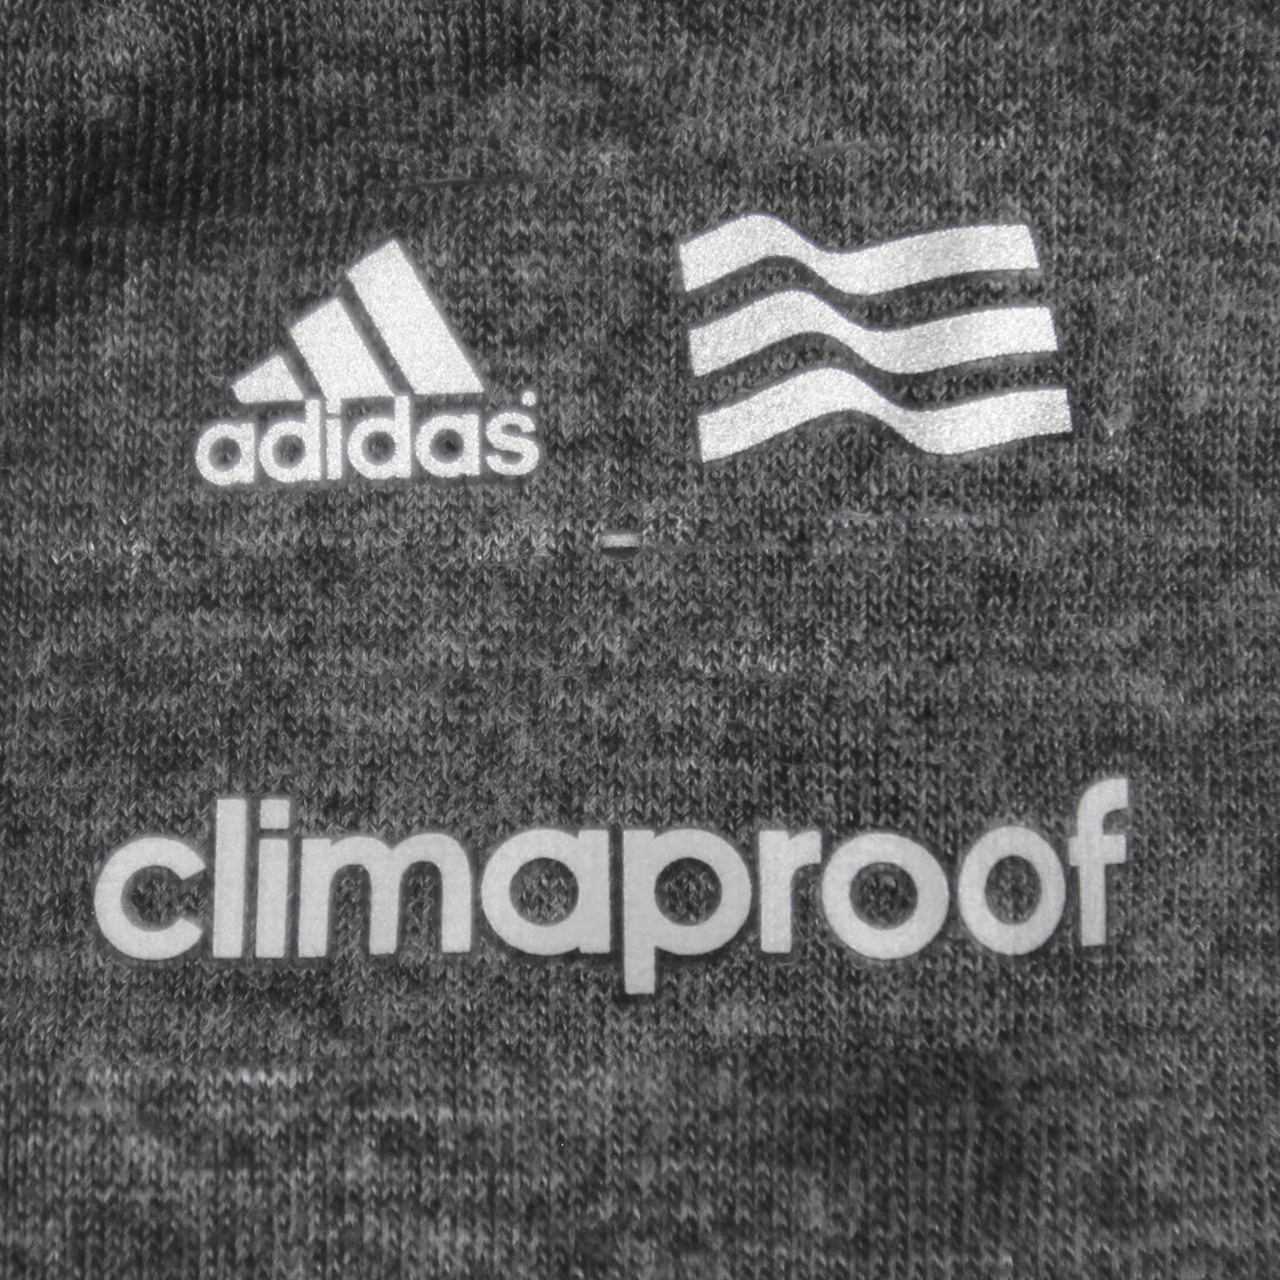 Climaproof